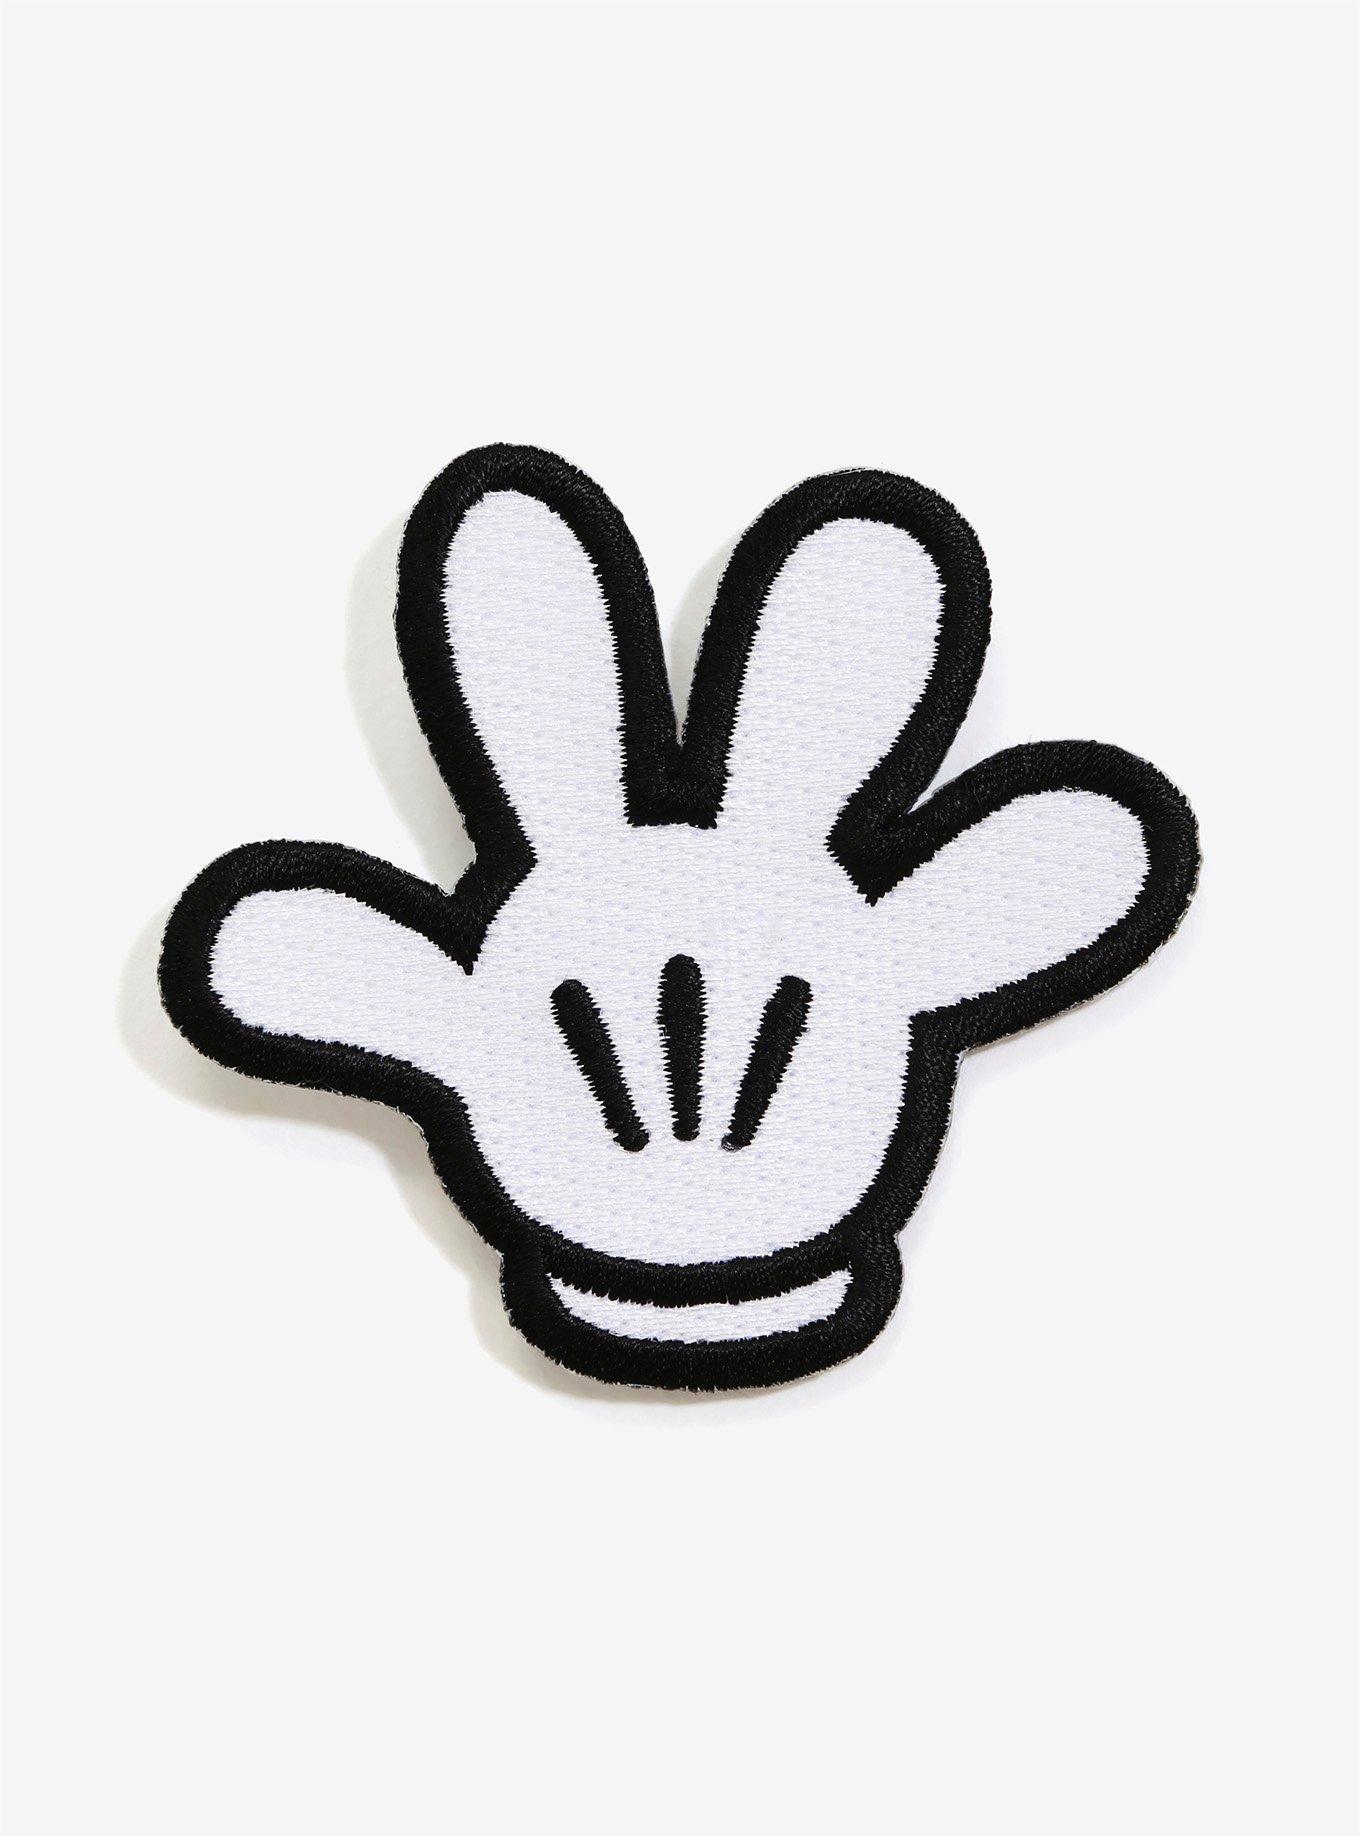 Mickey iron On Patch Disney Patches iron on Patches For Jacket Sew On Patch